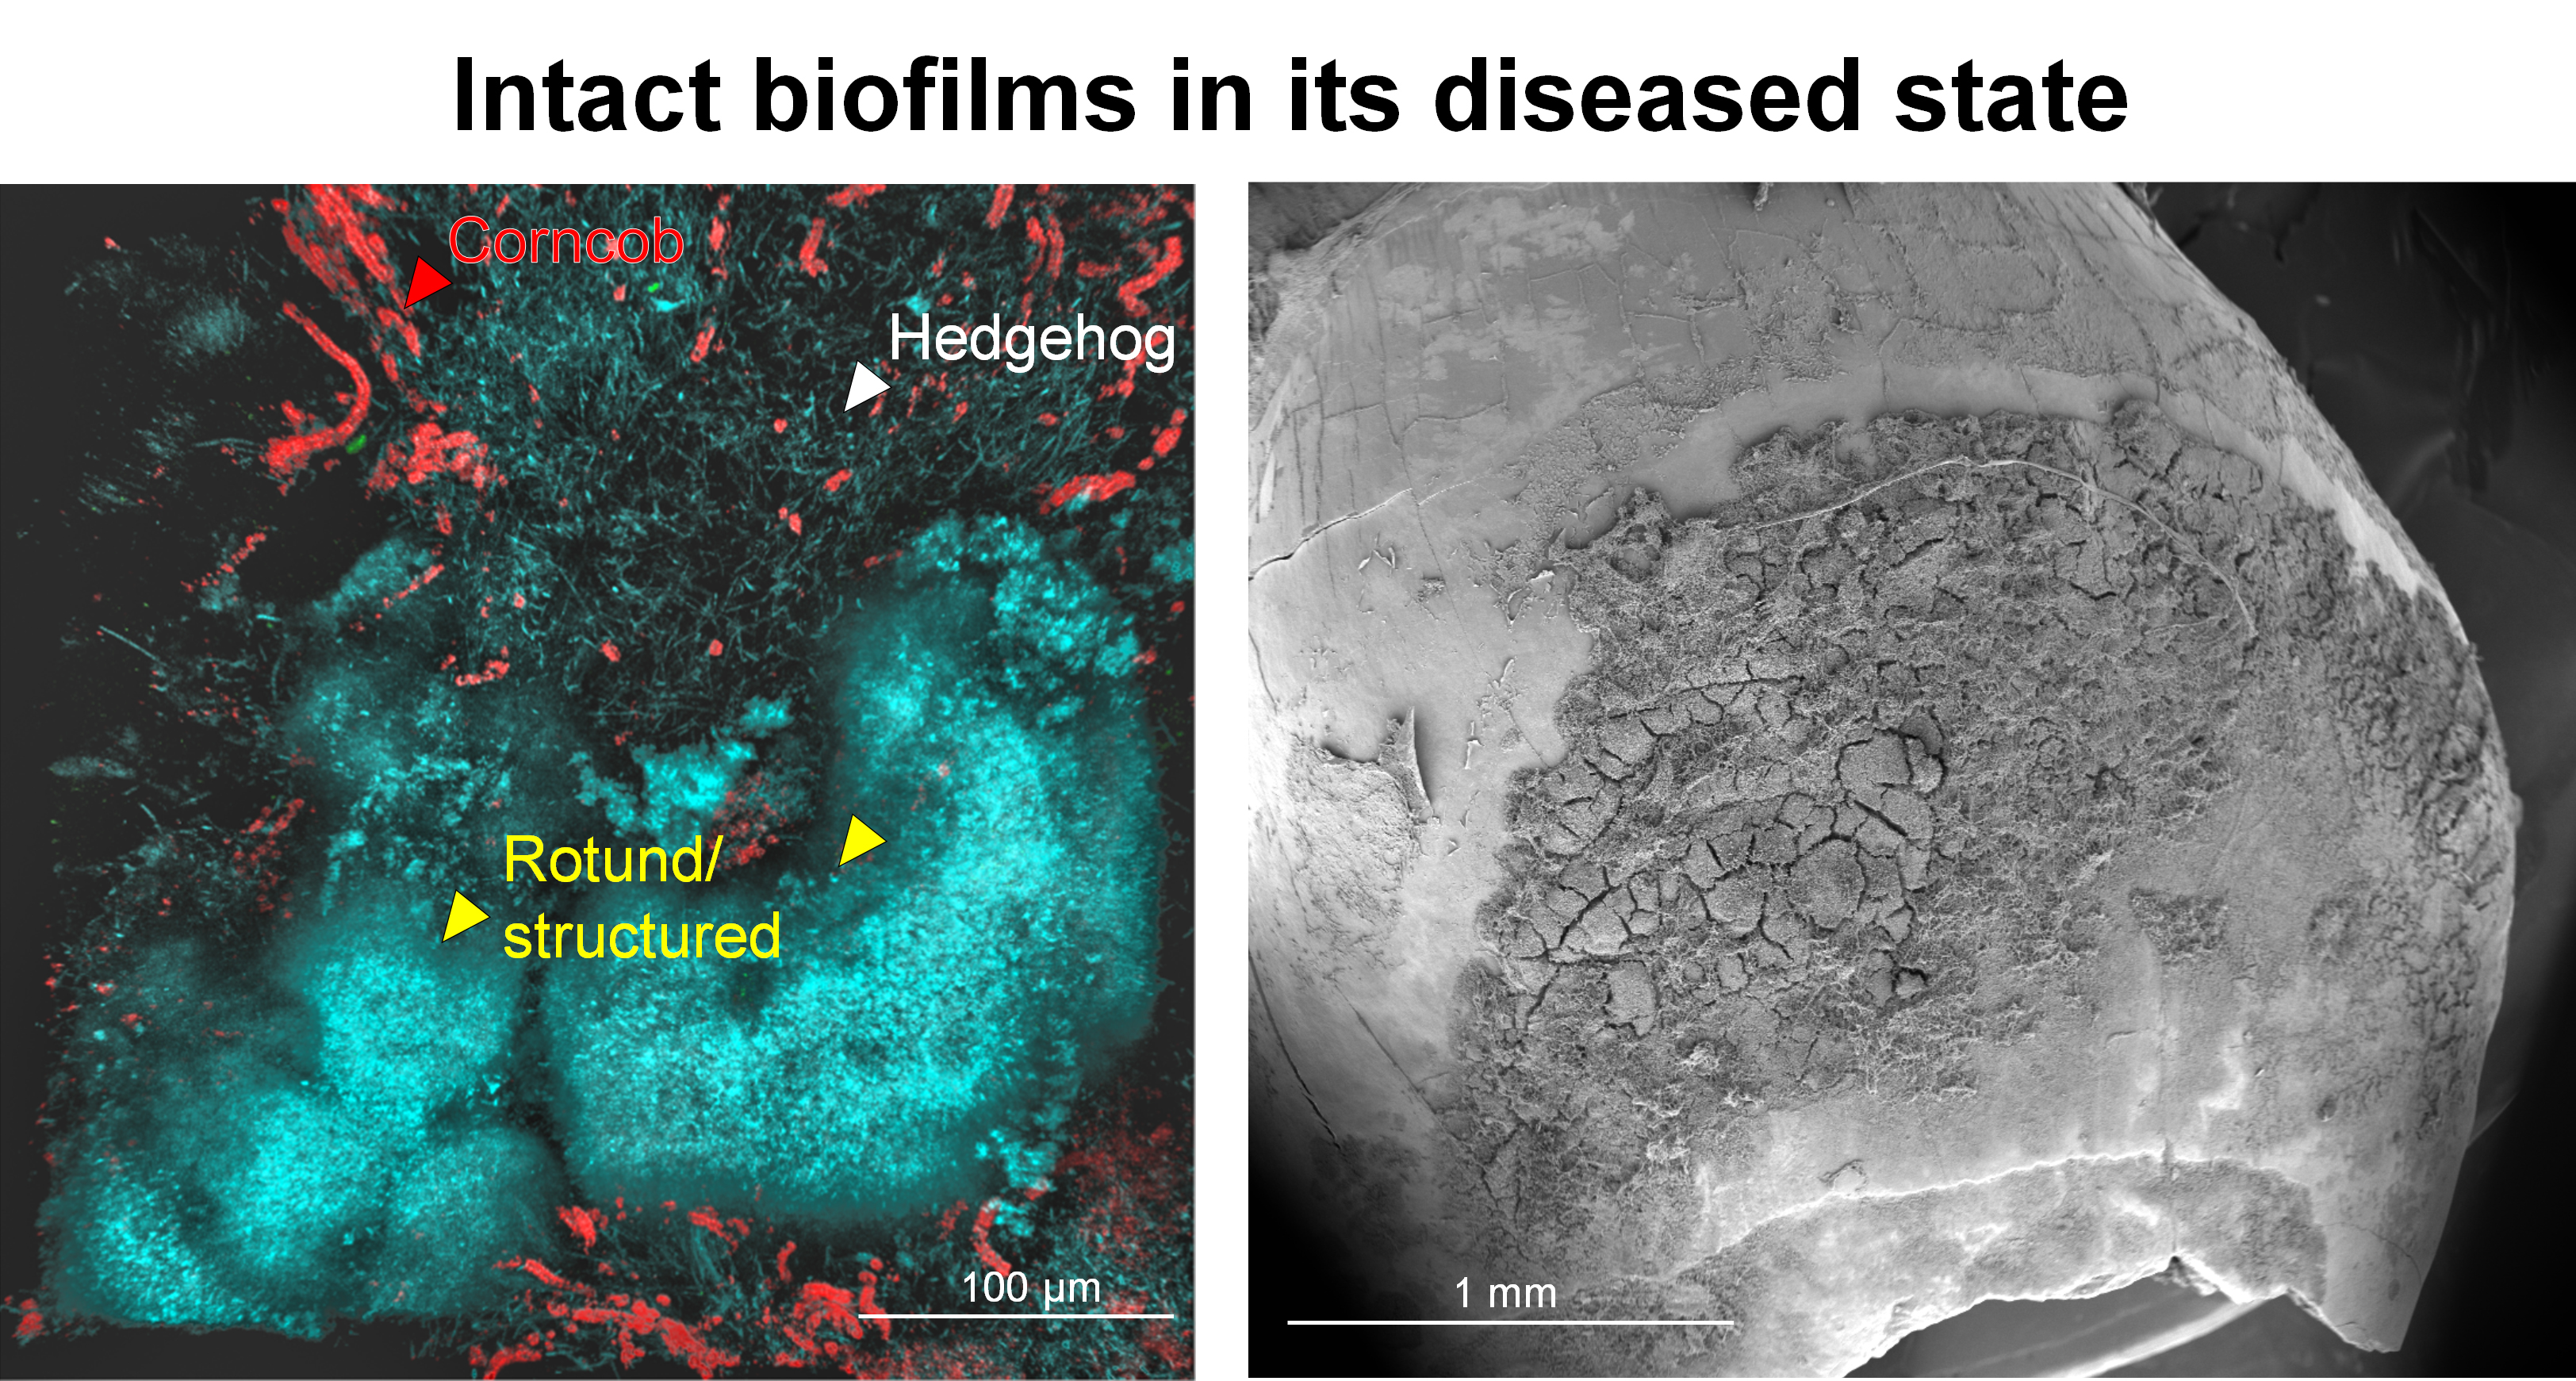 Intact biofilms in its diseased state